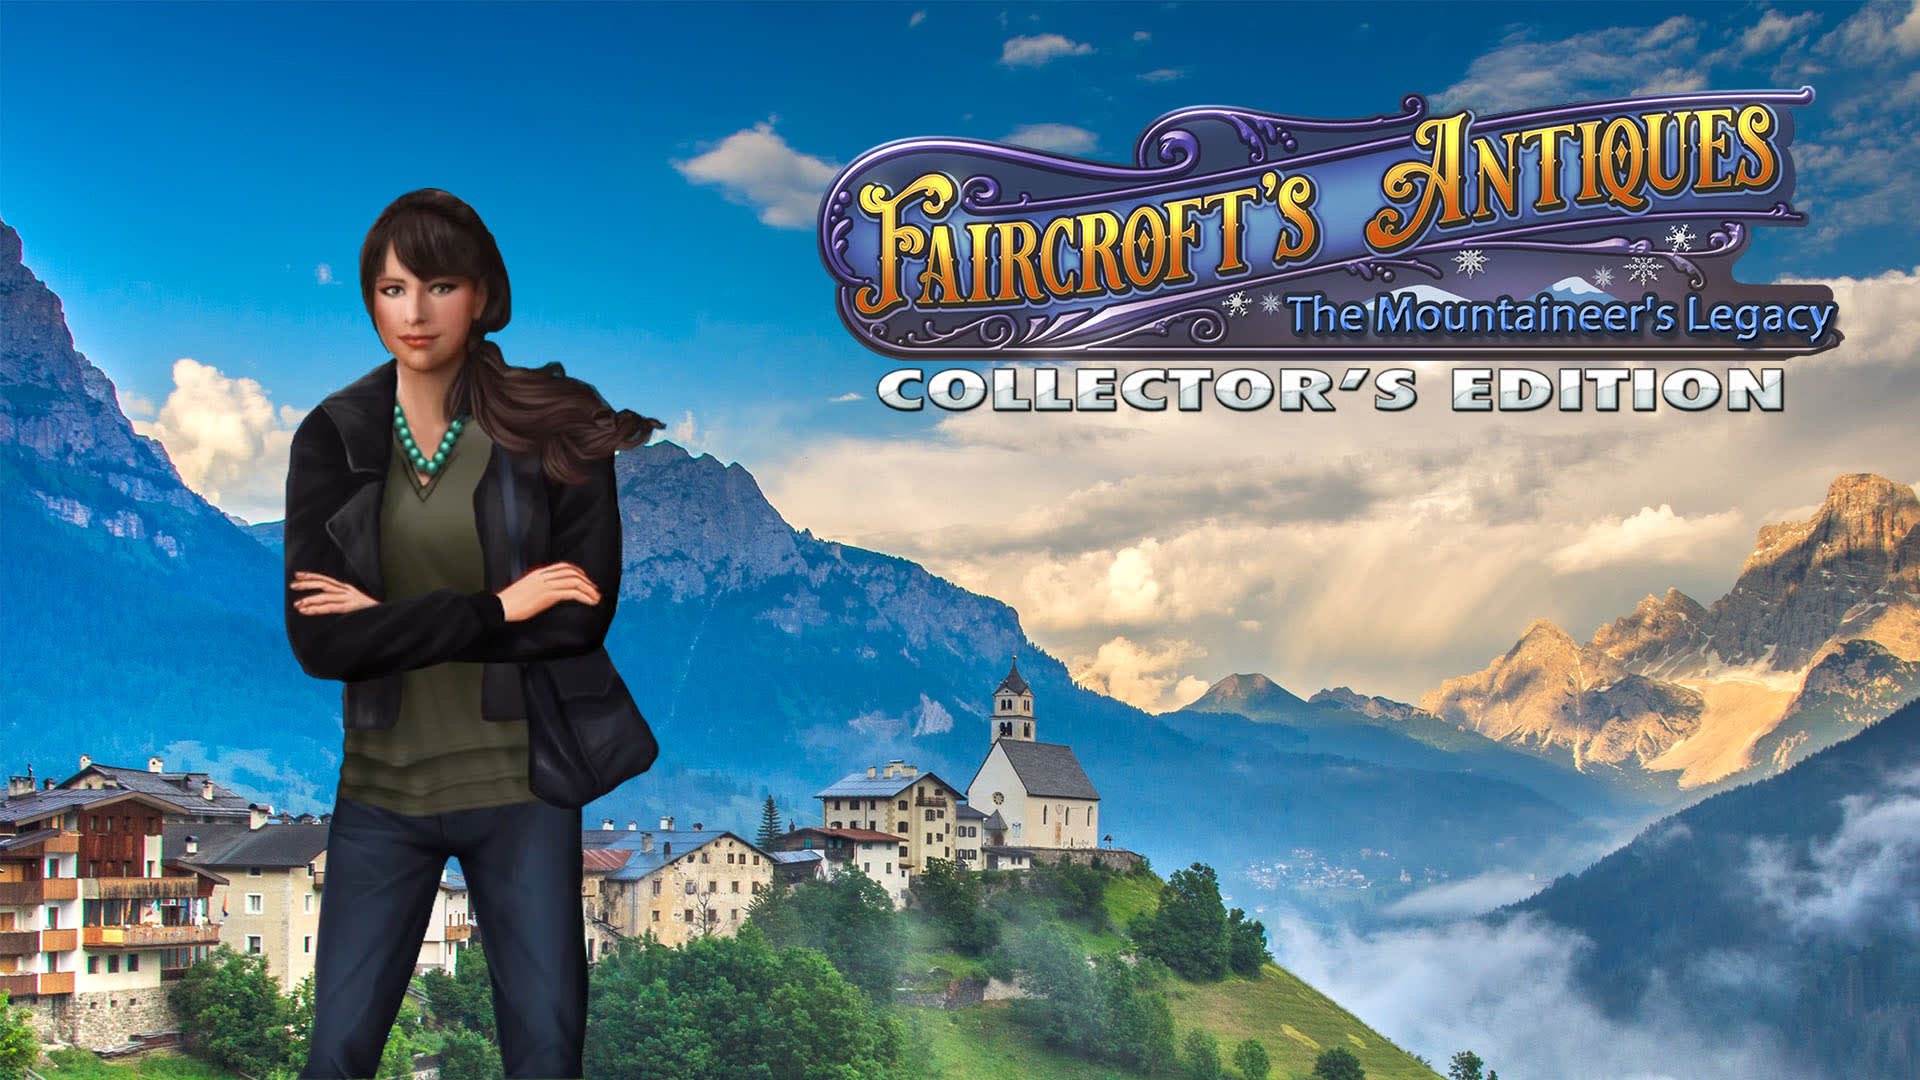 Faircroft's Antiques: The Mountaineer's Legacy - Collector's Edition